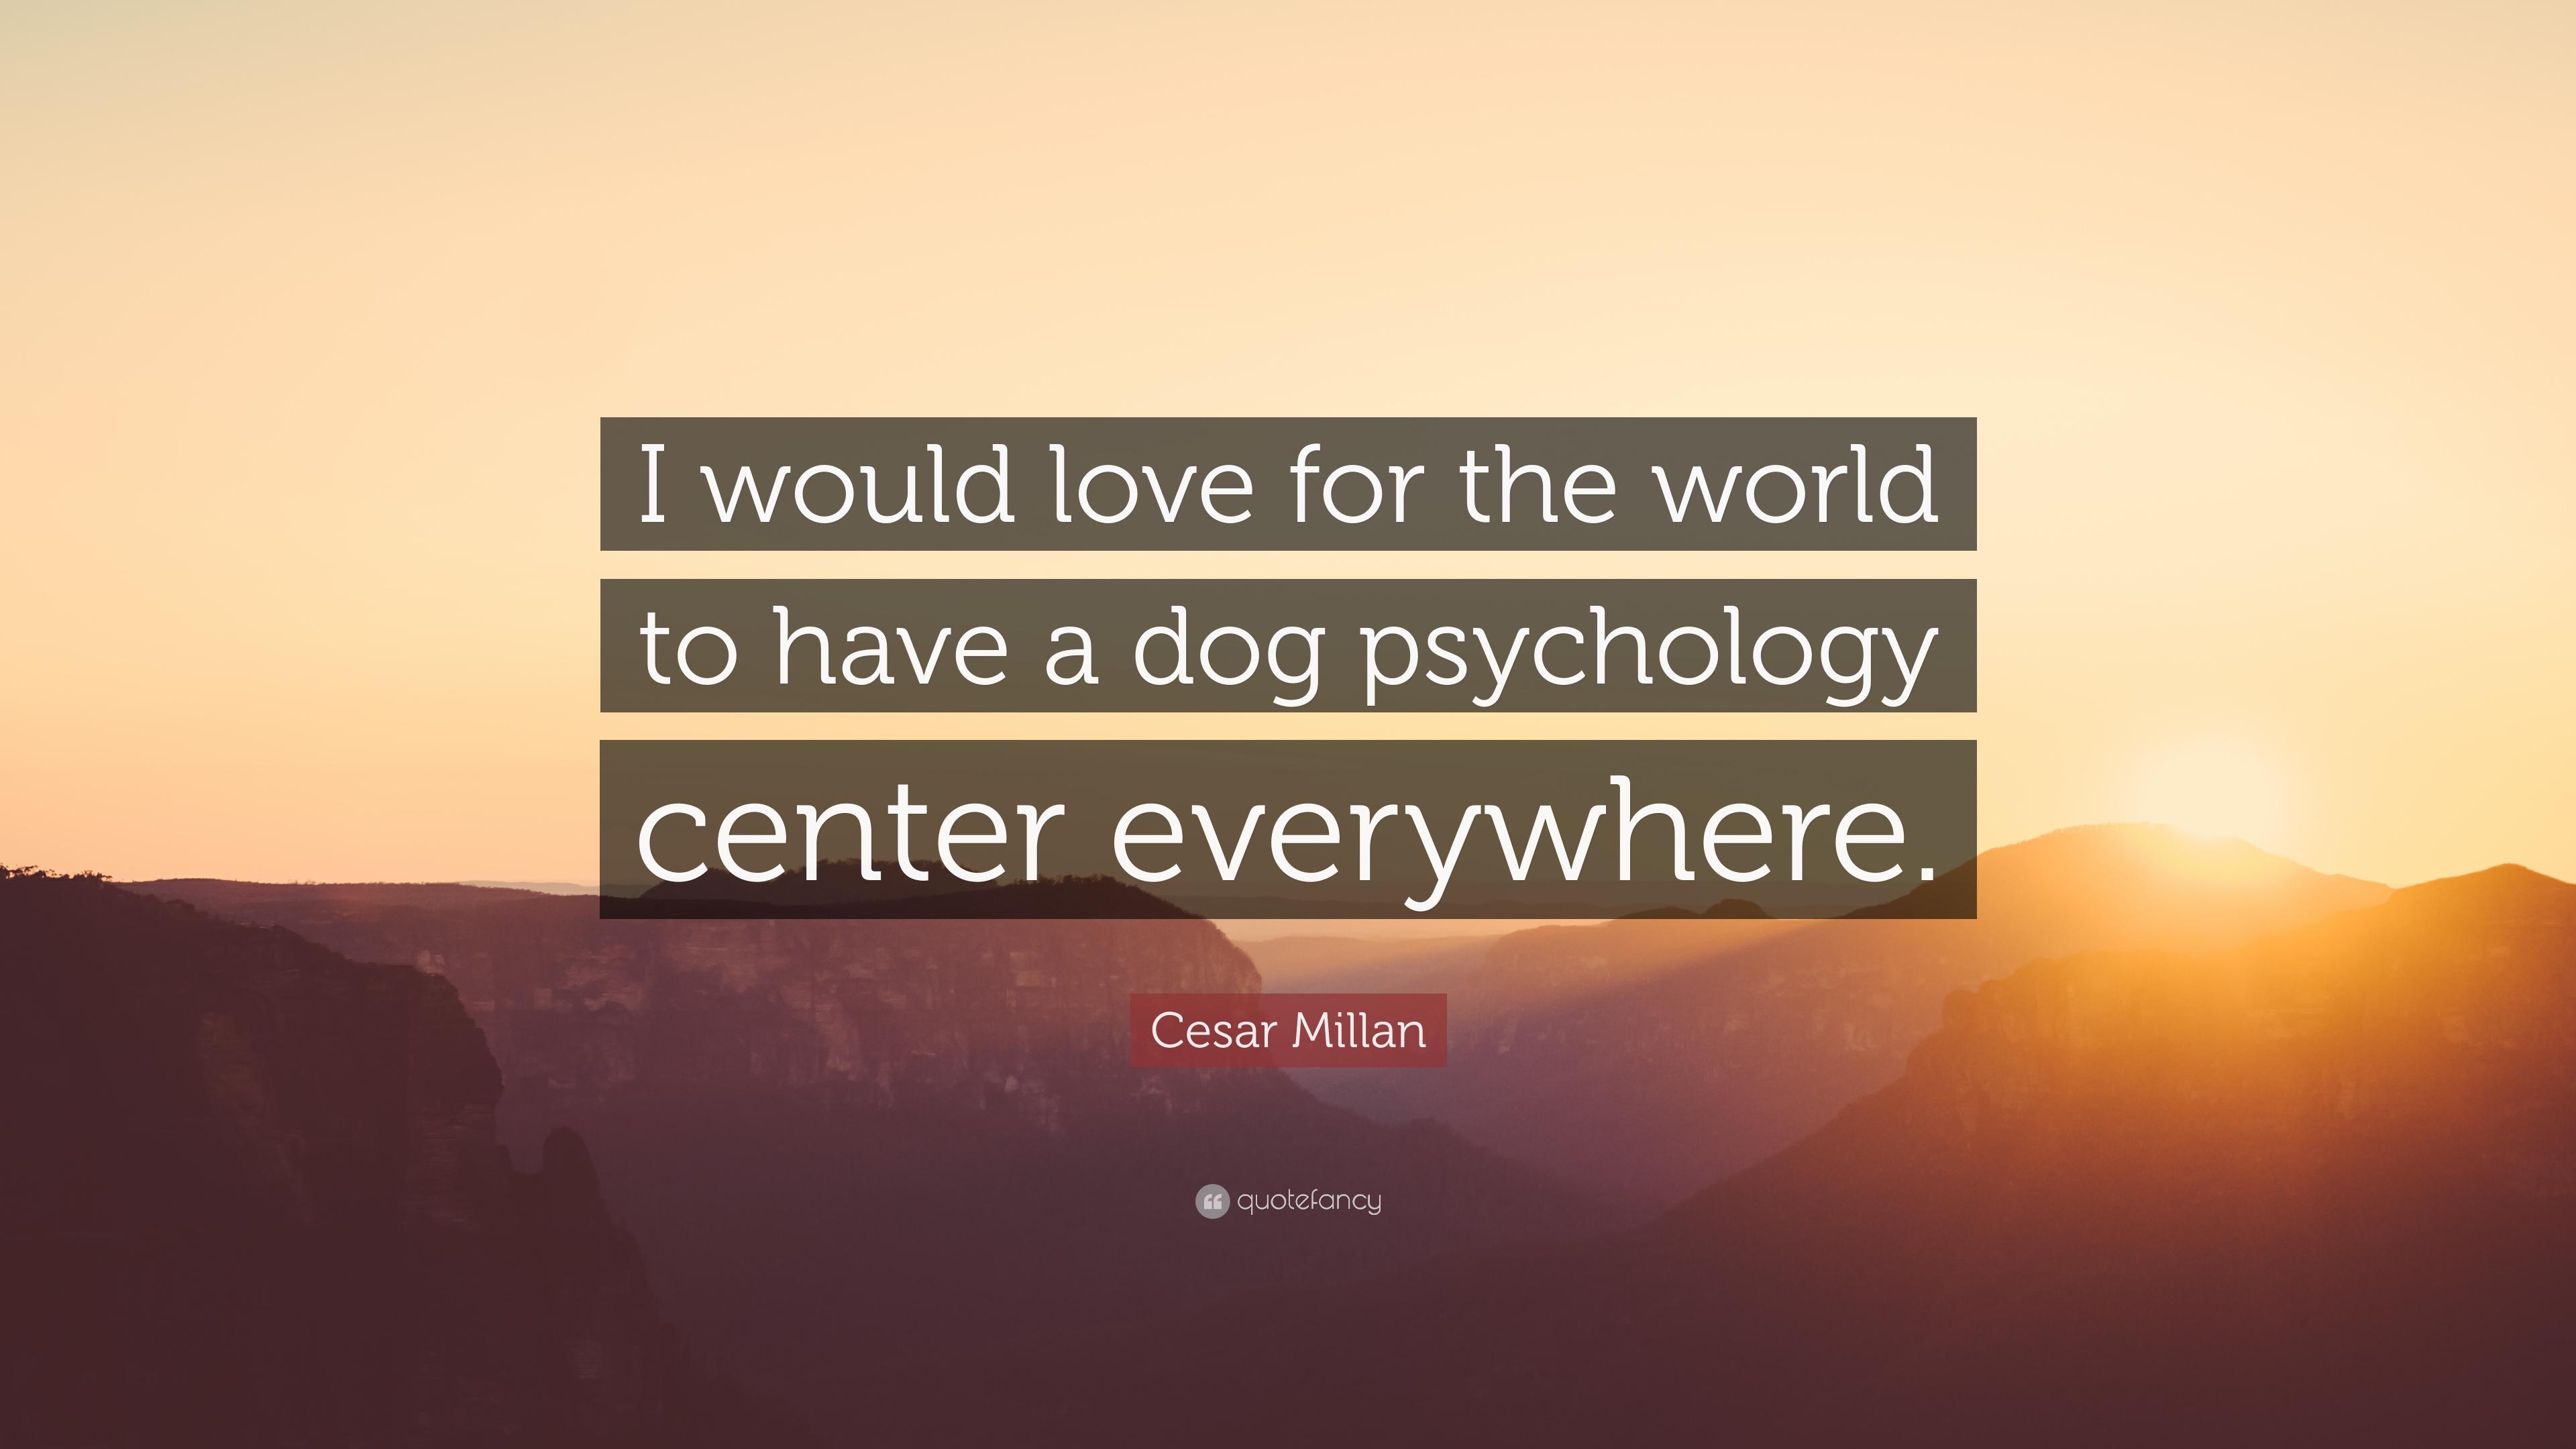 Cesar Millan Quote: “I would love for the world to have a dog